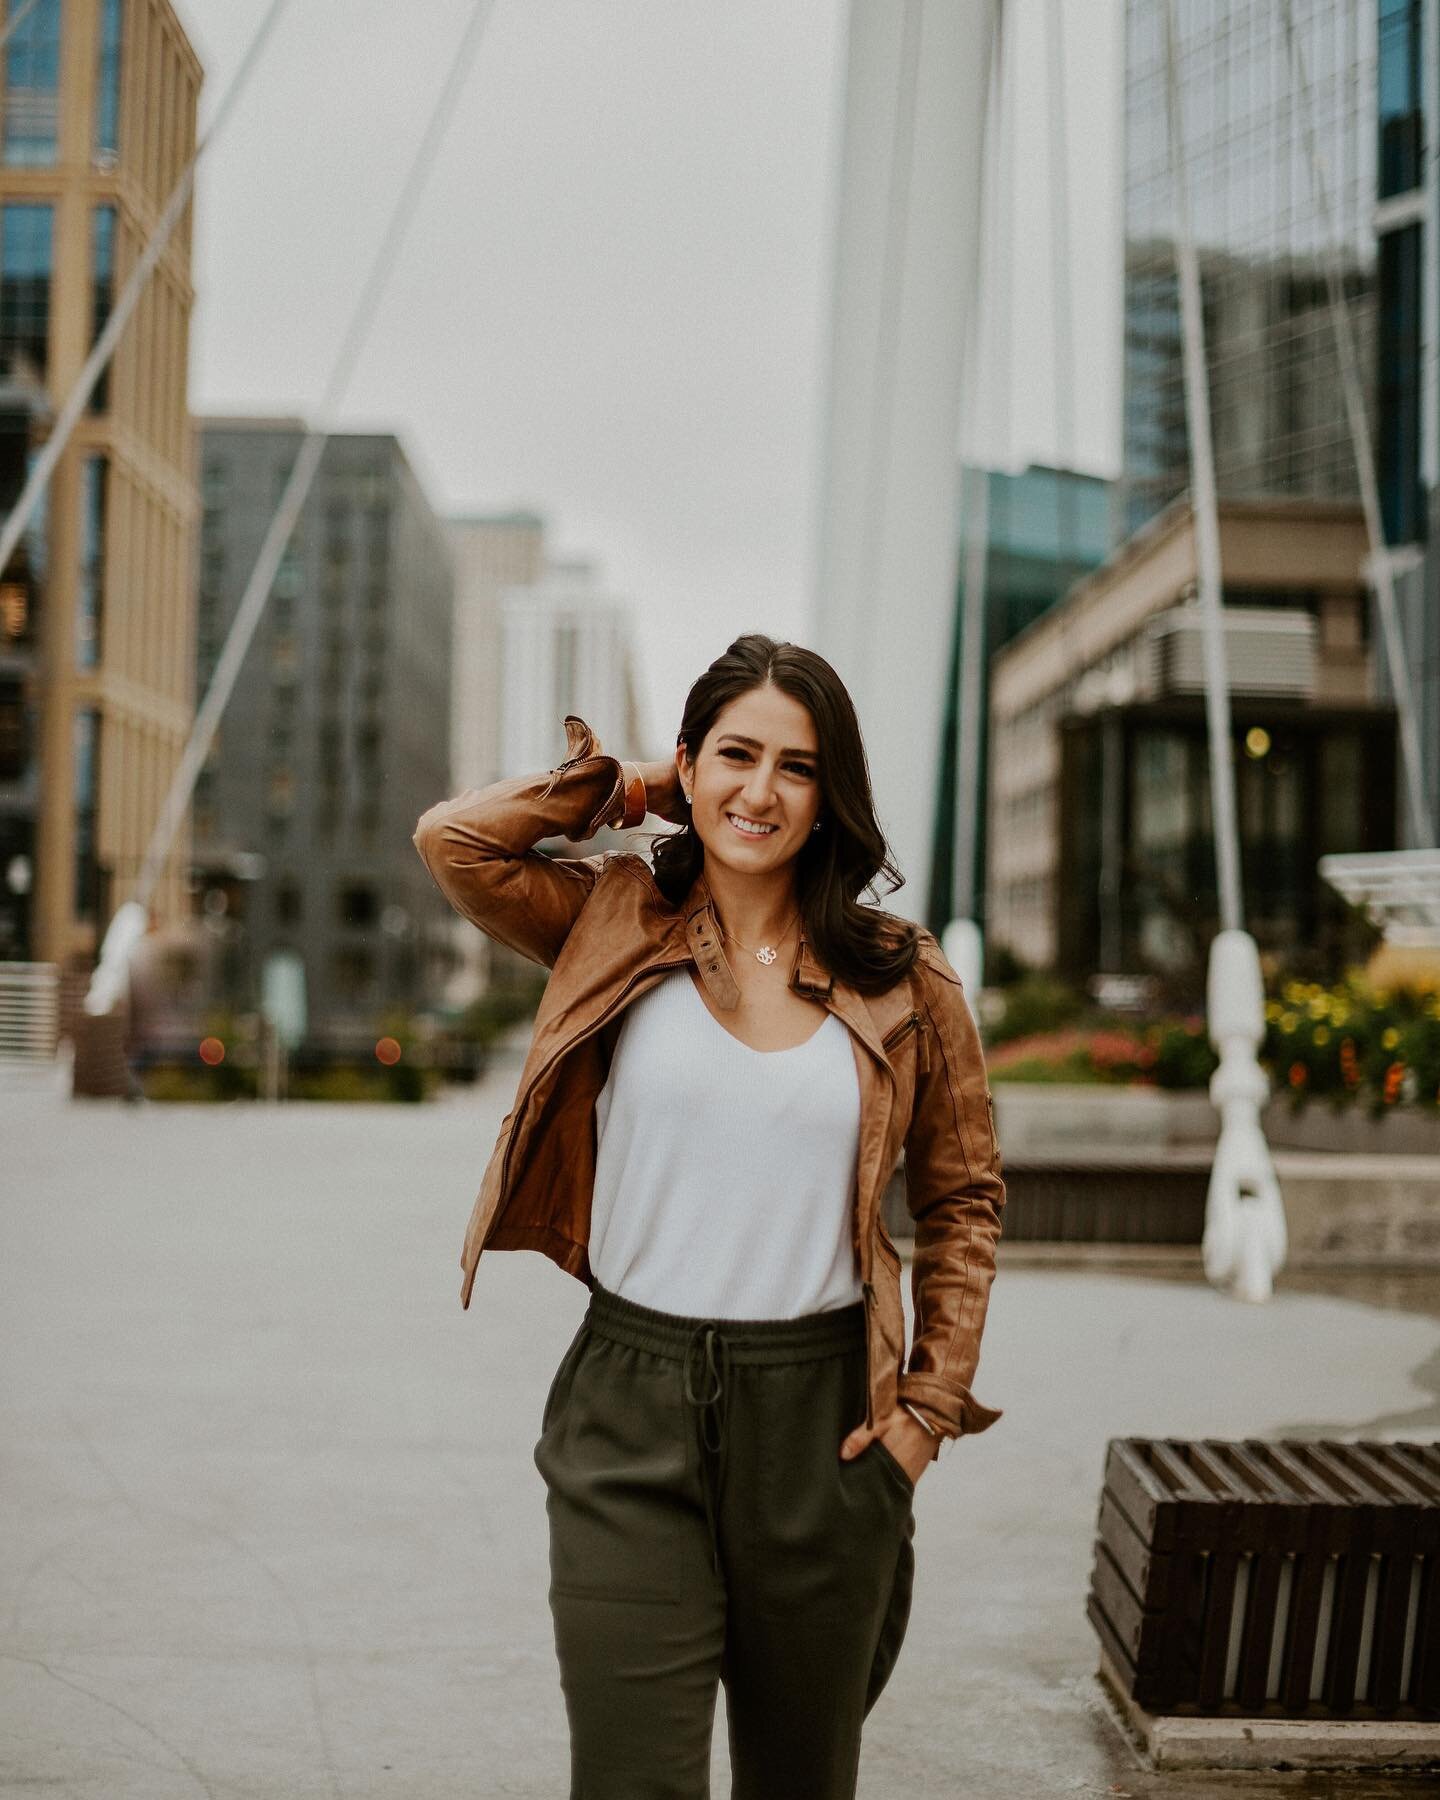 I adore personal branding sessions, especially with amazing  local entrepreneurs who identify as women, like Jessica! Jessica and I had a great time galavanting all over downtown Denver. It reminded me why I love this city so much! Denver is filled w